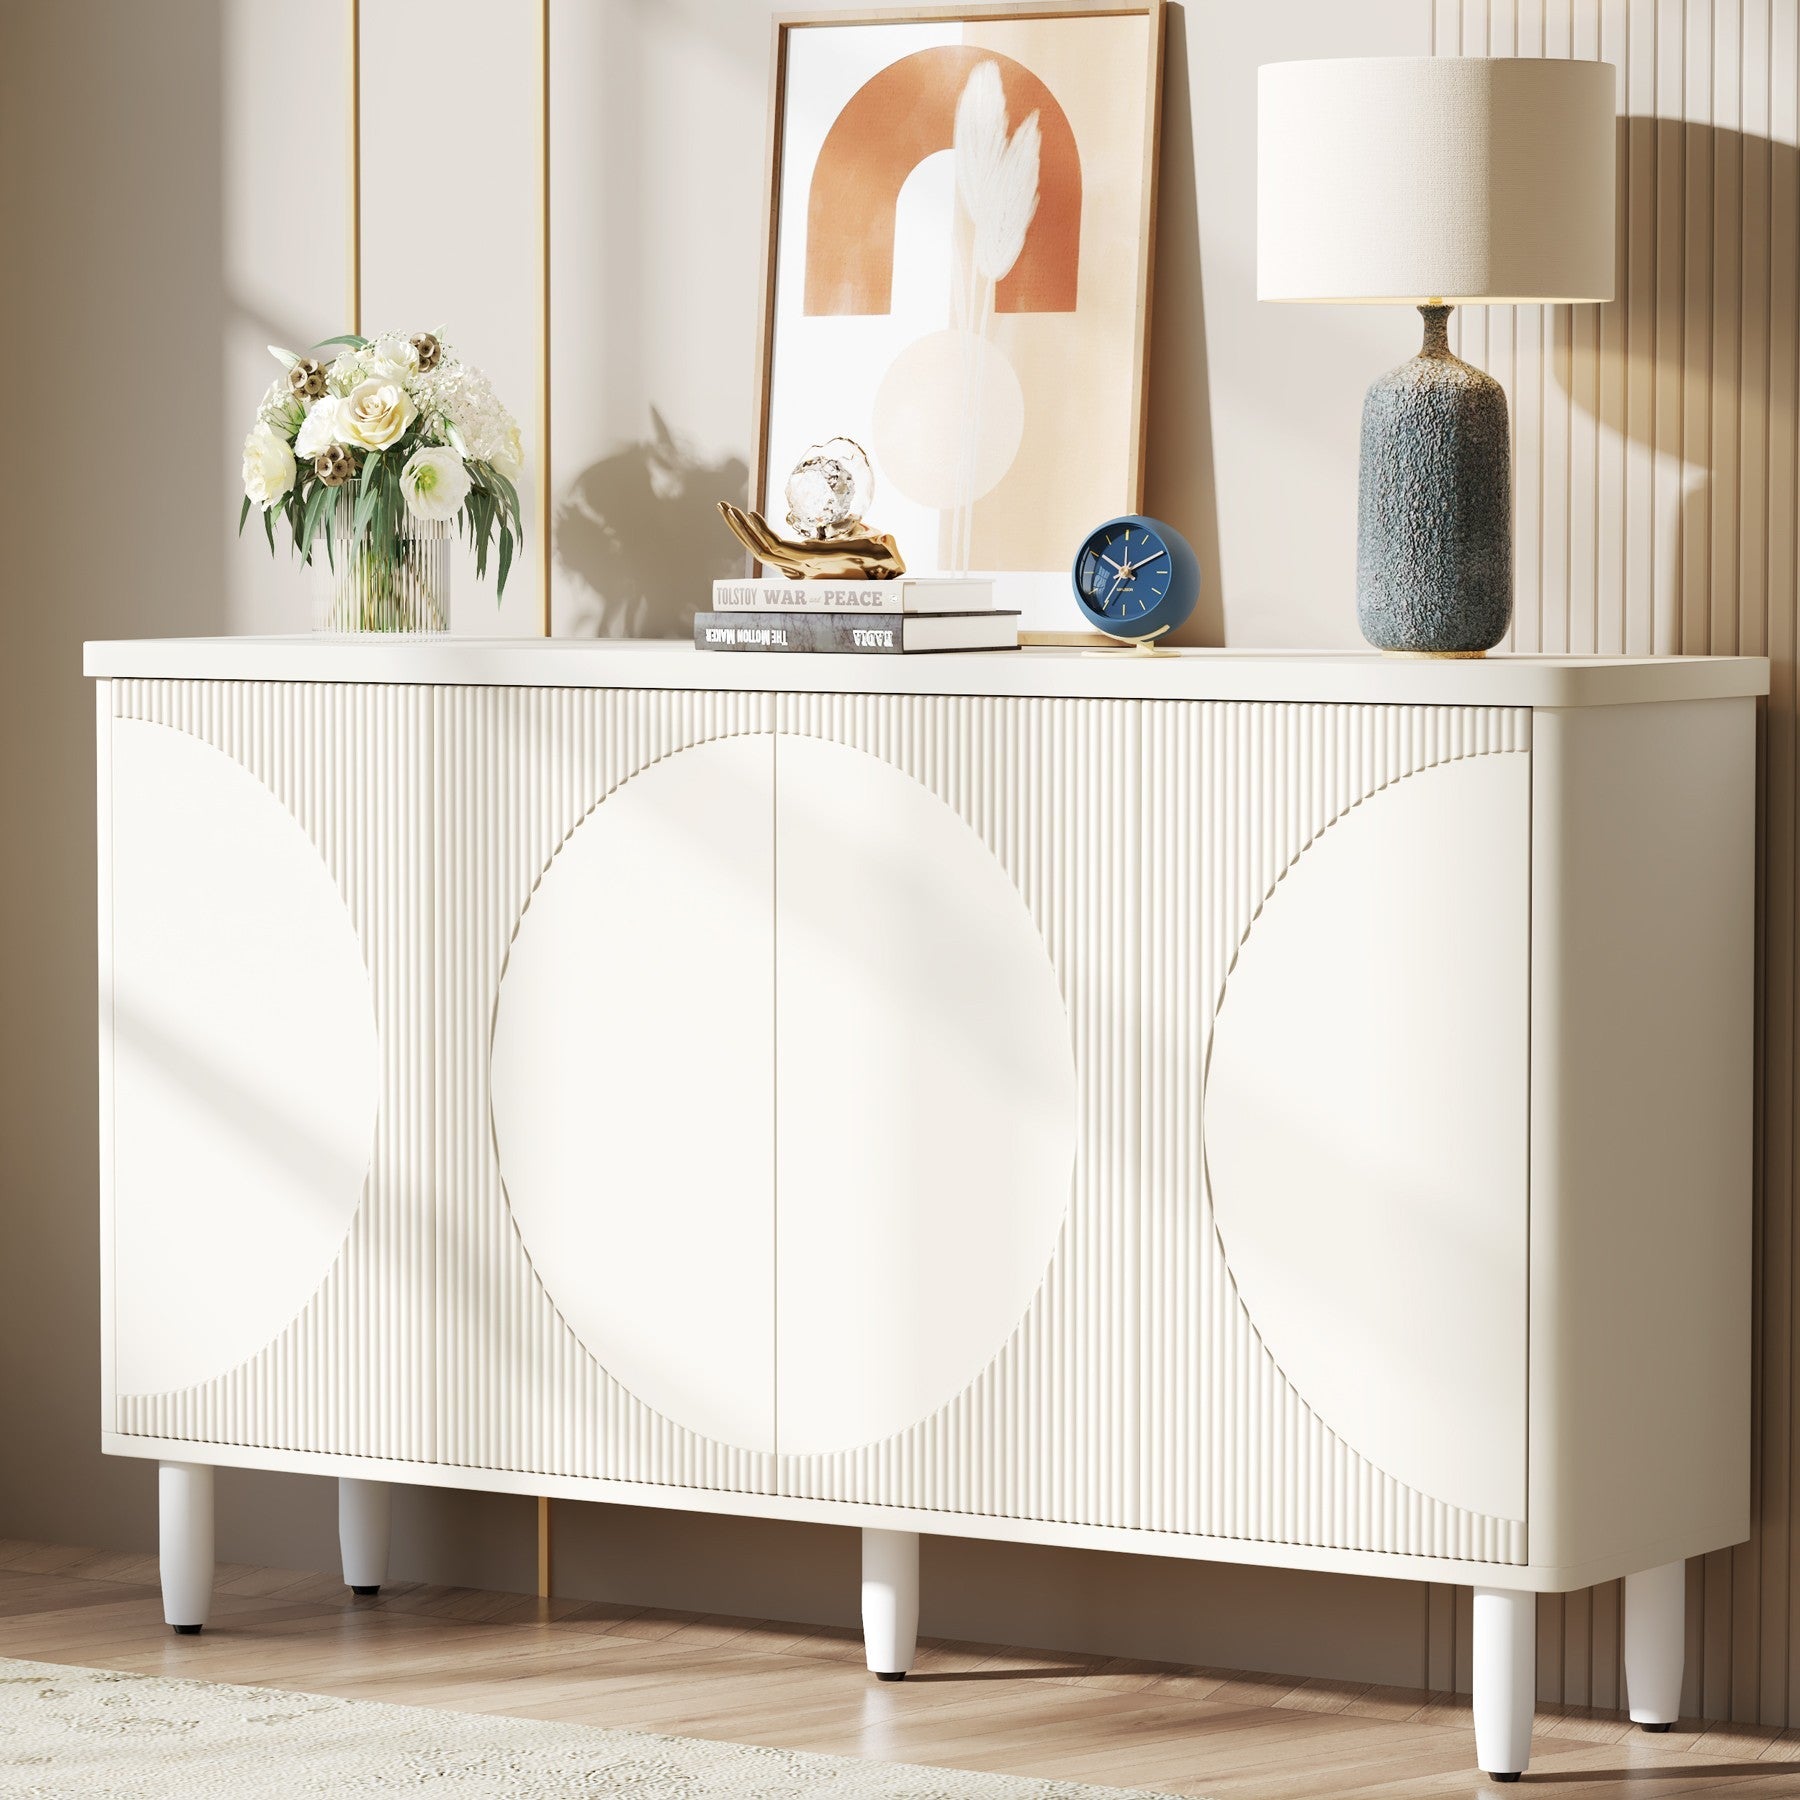 59.4 Sideboard Buffet, White Credenza Storage Cabinet with Doors